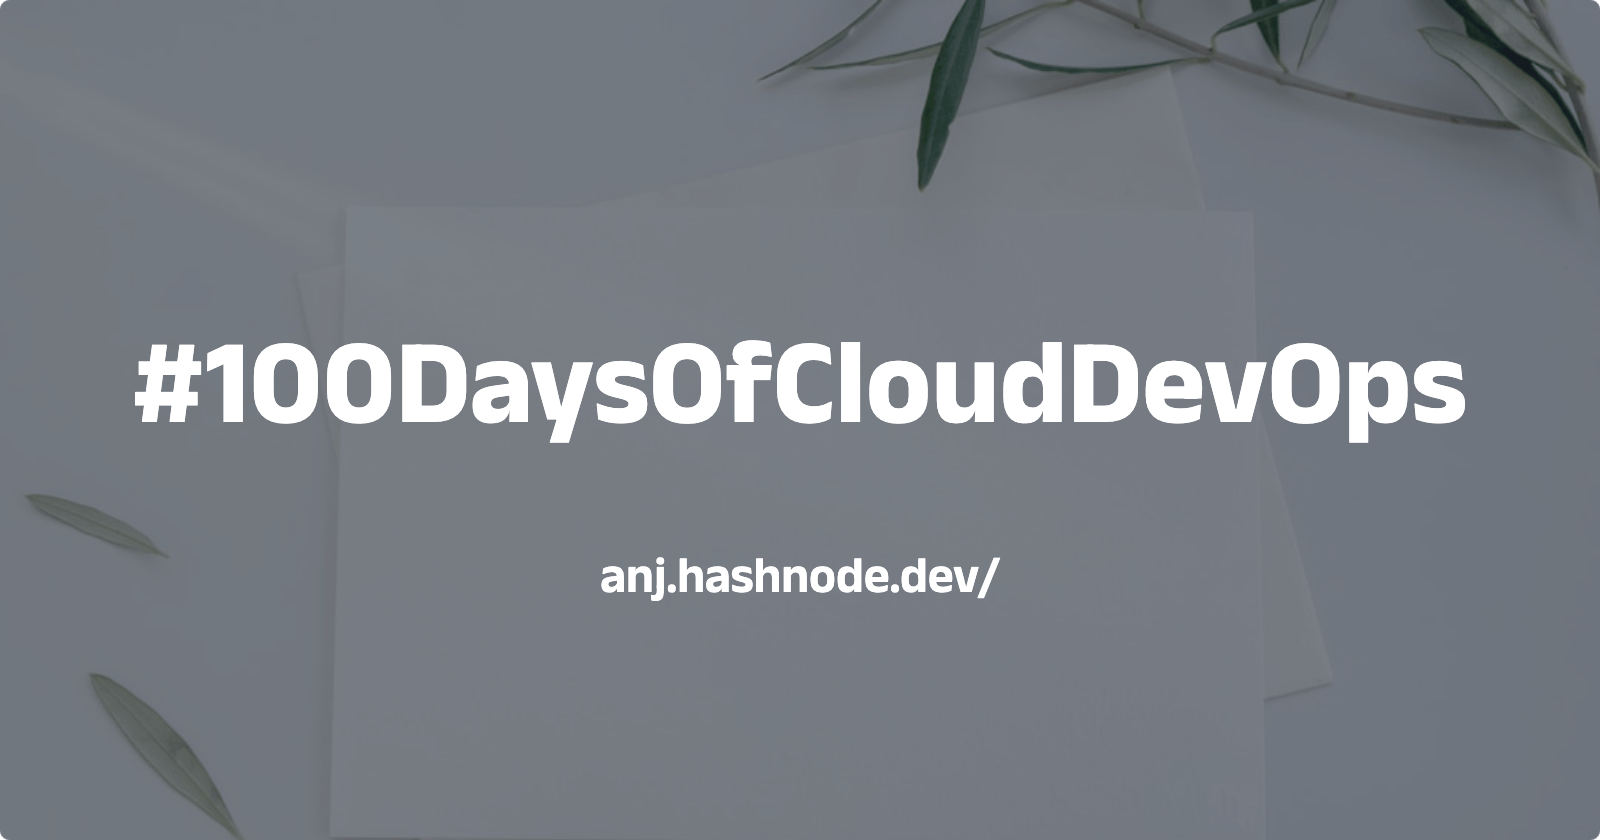 #100DaysOfCloudDevOps Challenge — Day 00 — What is 100 Days Of Cloud DevOps and why am I taking this challenge?